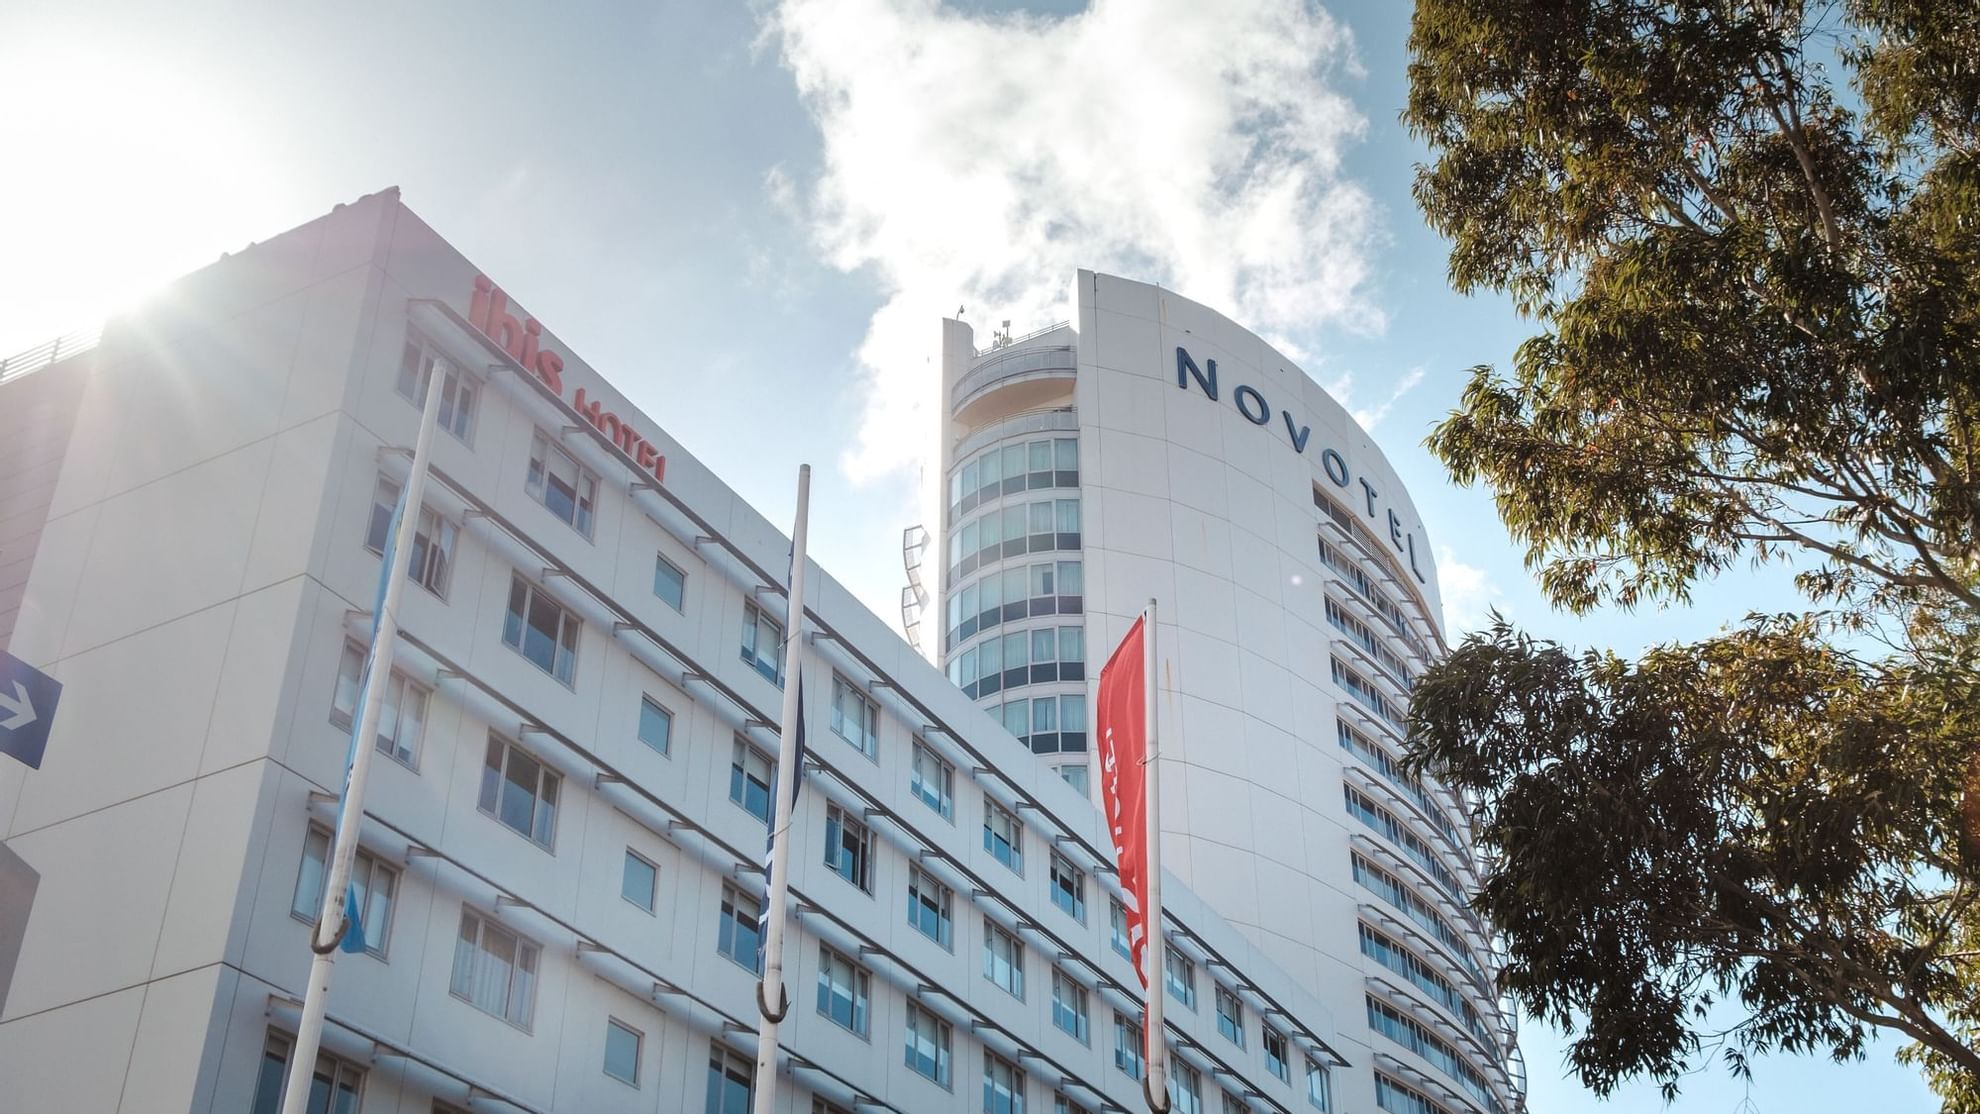 Exterior view of Novotel Sydney Olympic Park at day time